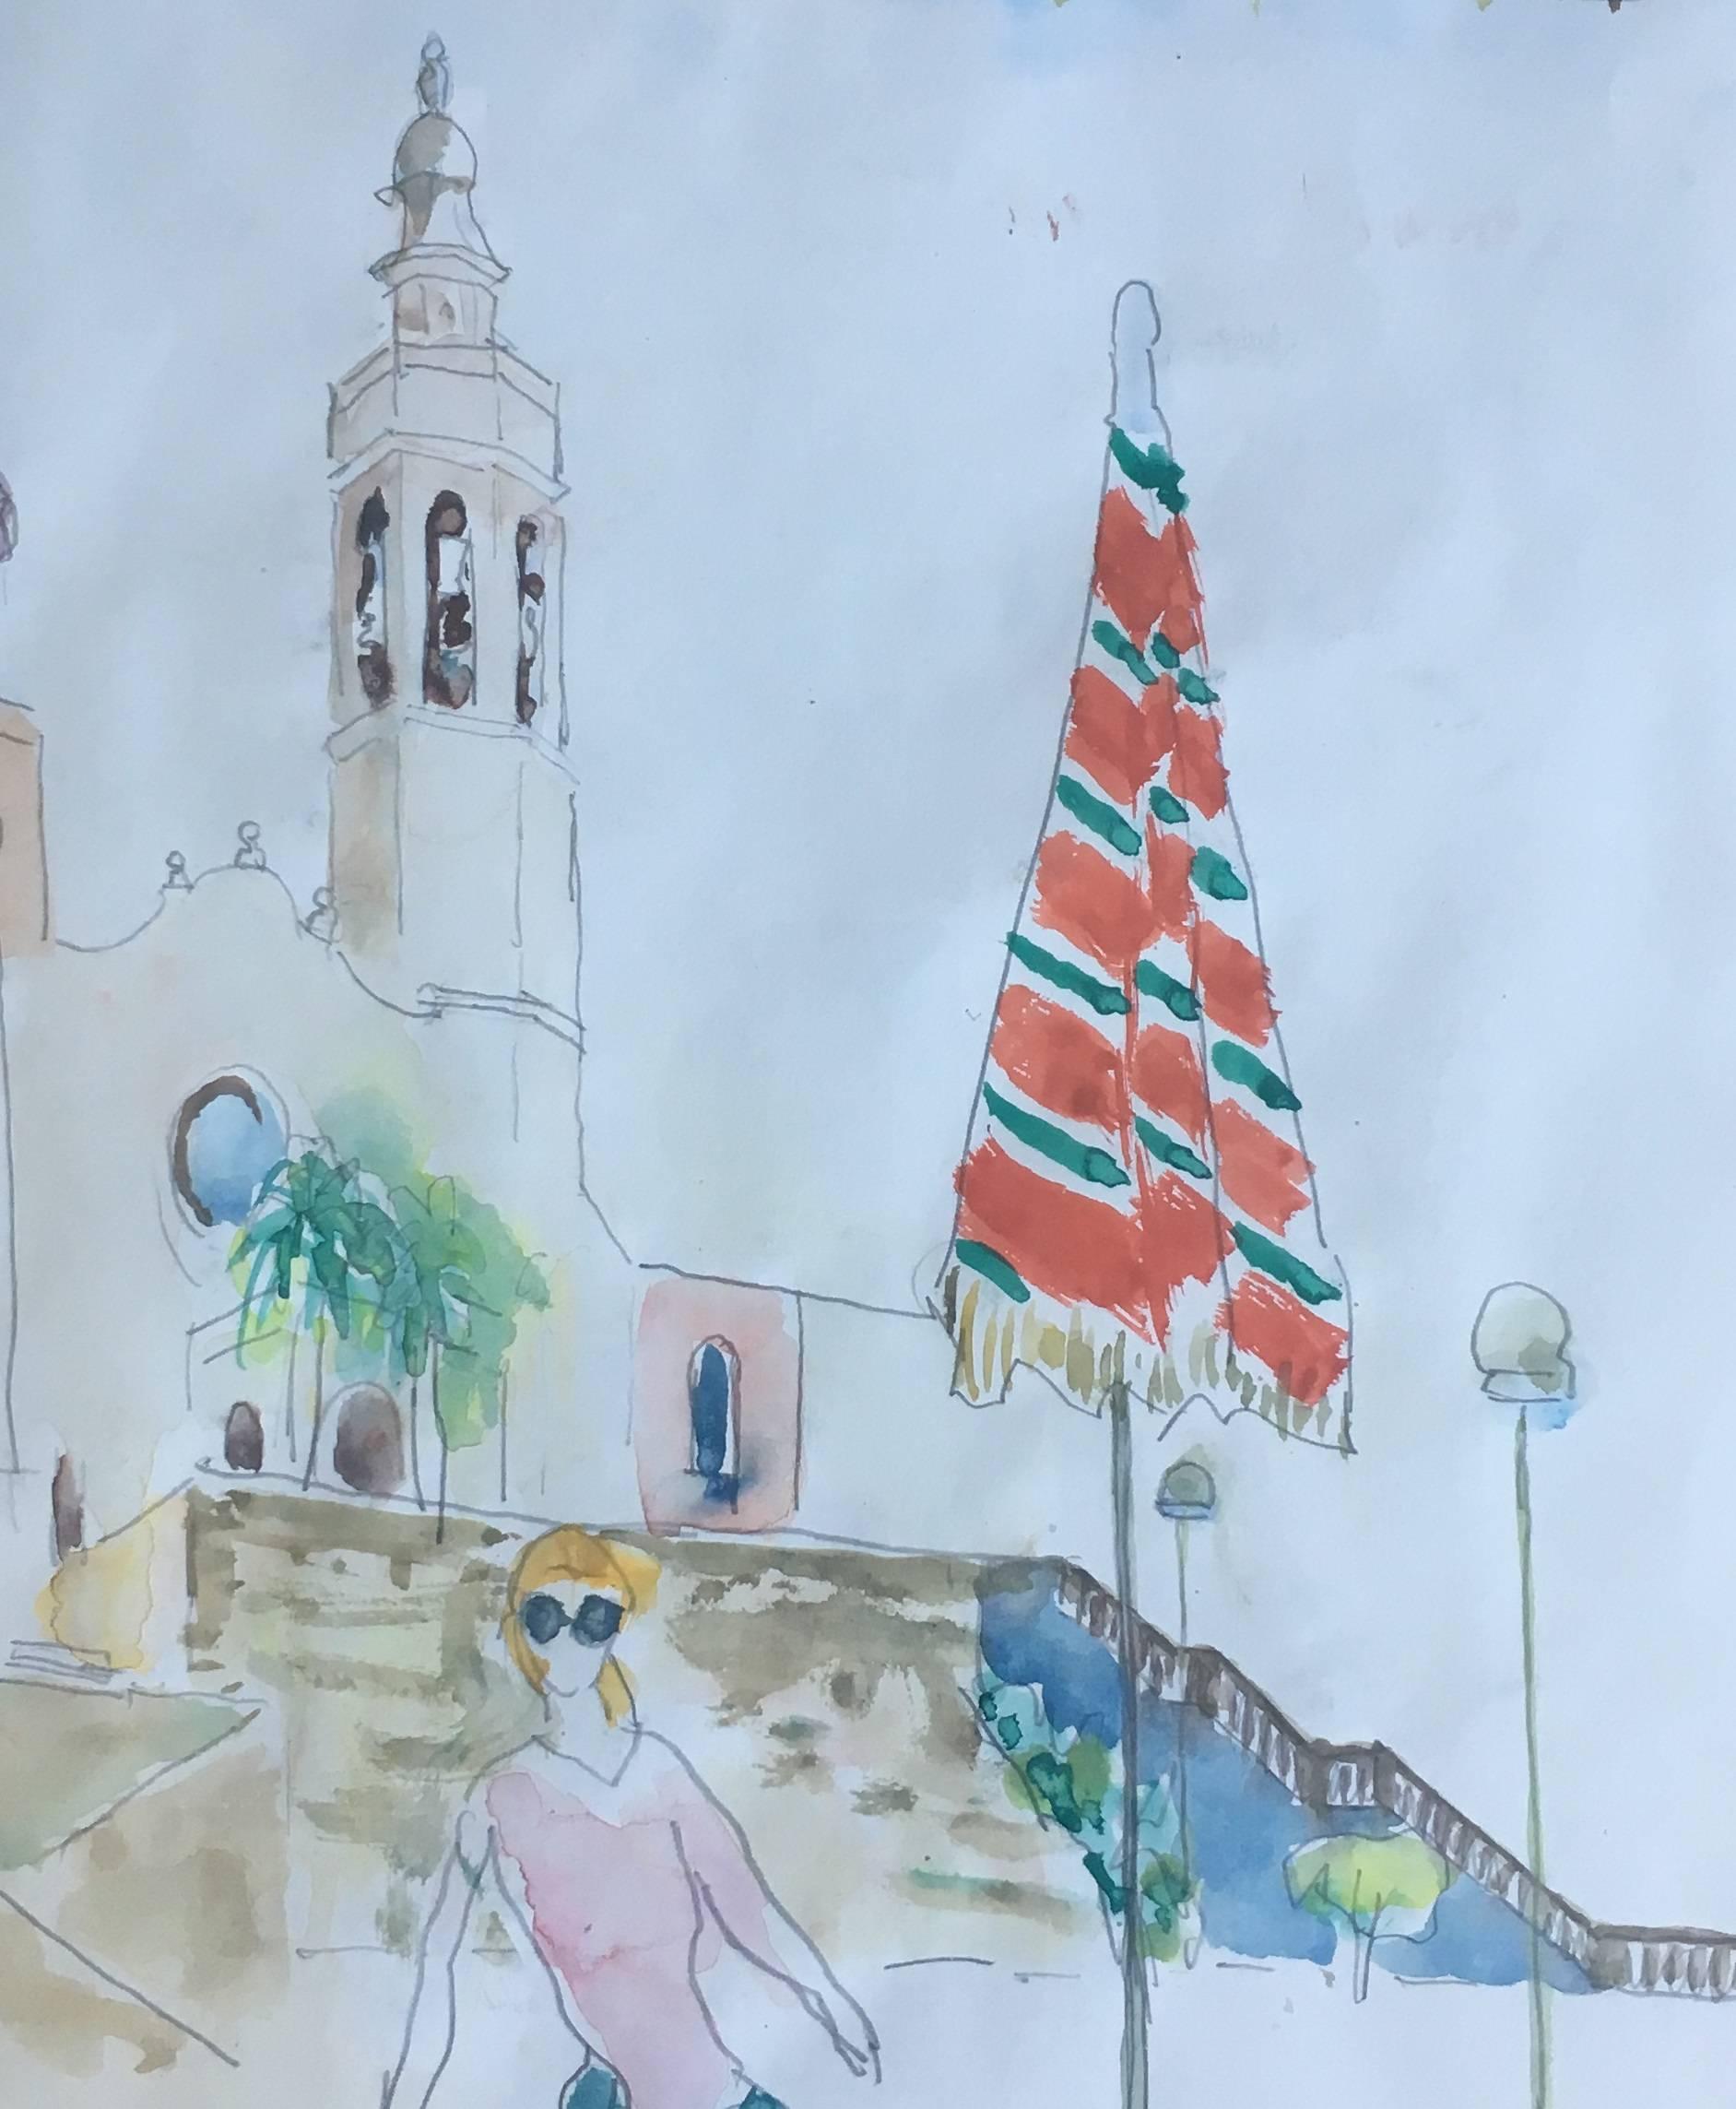 SITGES. Barcelona original watercolor painting. 
MUNDO Ignasi 
Ignasi Mundó trained at the School of La Lonja, with Joaquín Mir, Mariano Pidelaserra and Manolo Hugué. In 1945 he received a scholarship travels to Paris, and later made several study